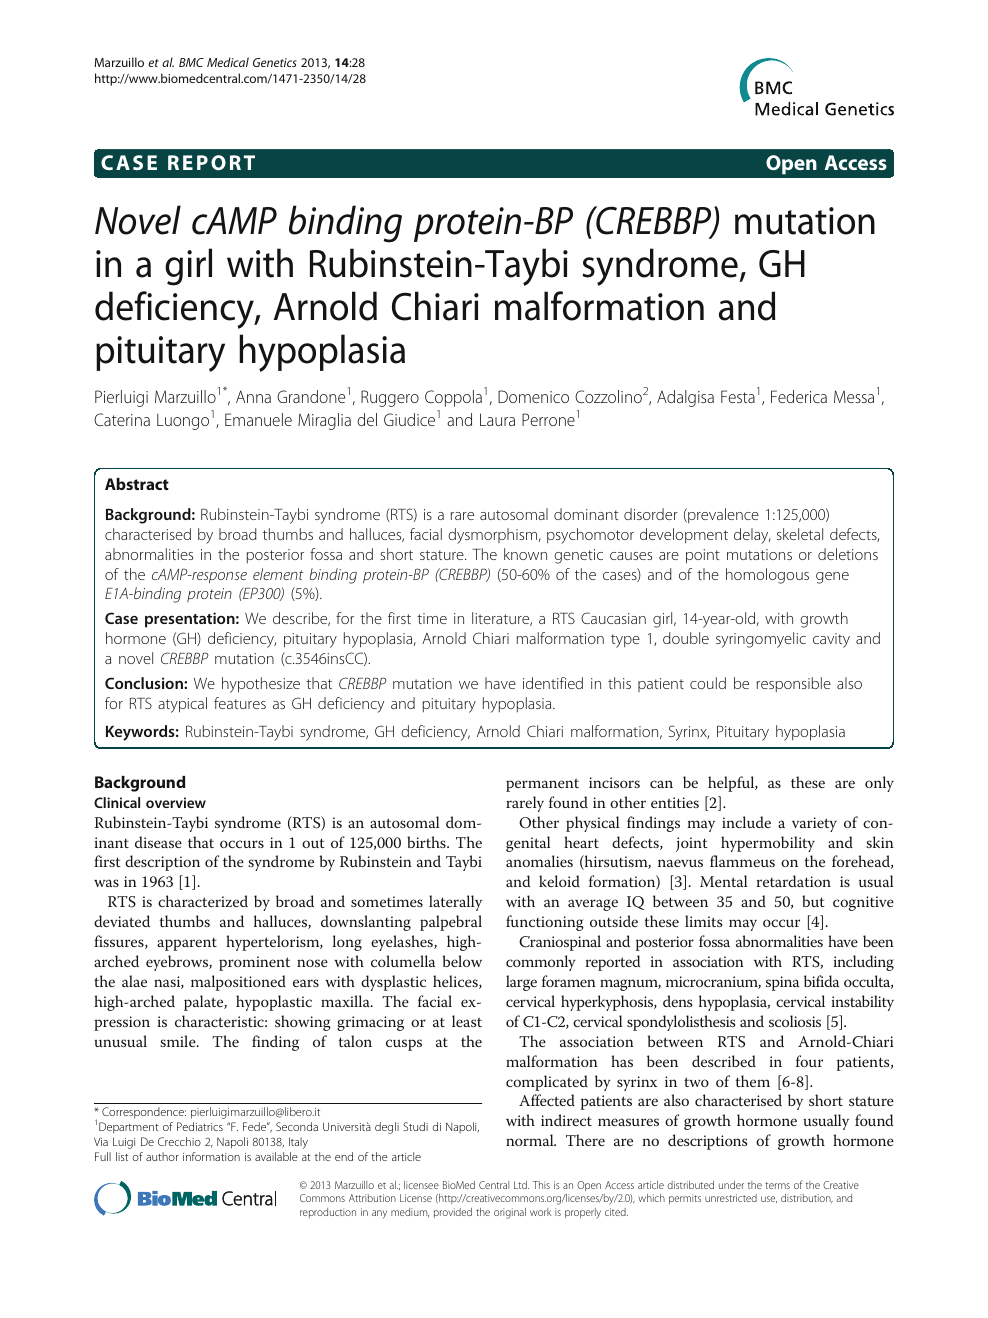 First case report of inherited Rubinstein-Taybi syndrome associated with a  novel EP300 variant – topic of research paper in Clinical medicine.  Download scholarly article PDF and read for free on CyberLeninka open